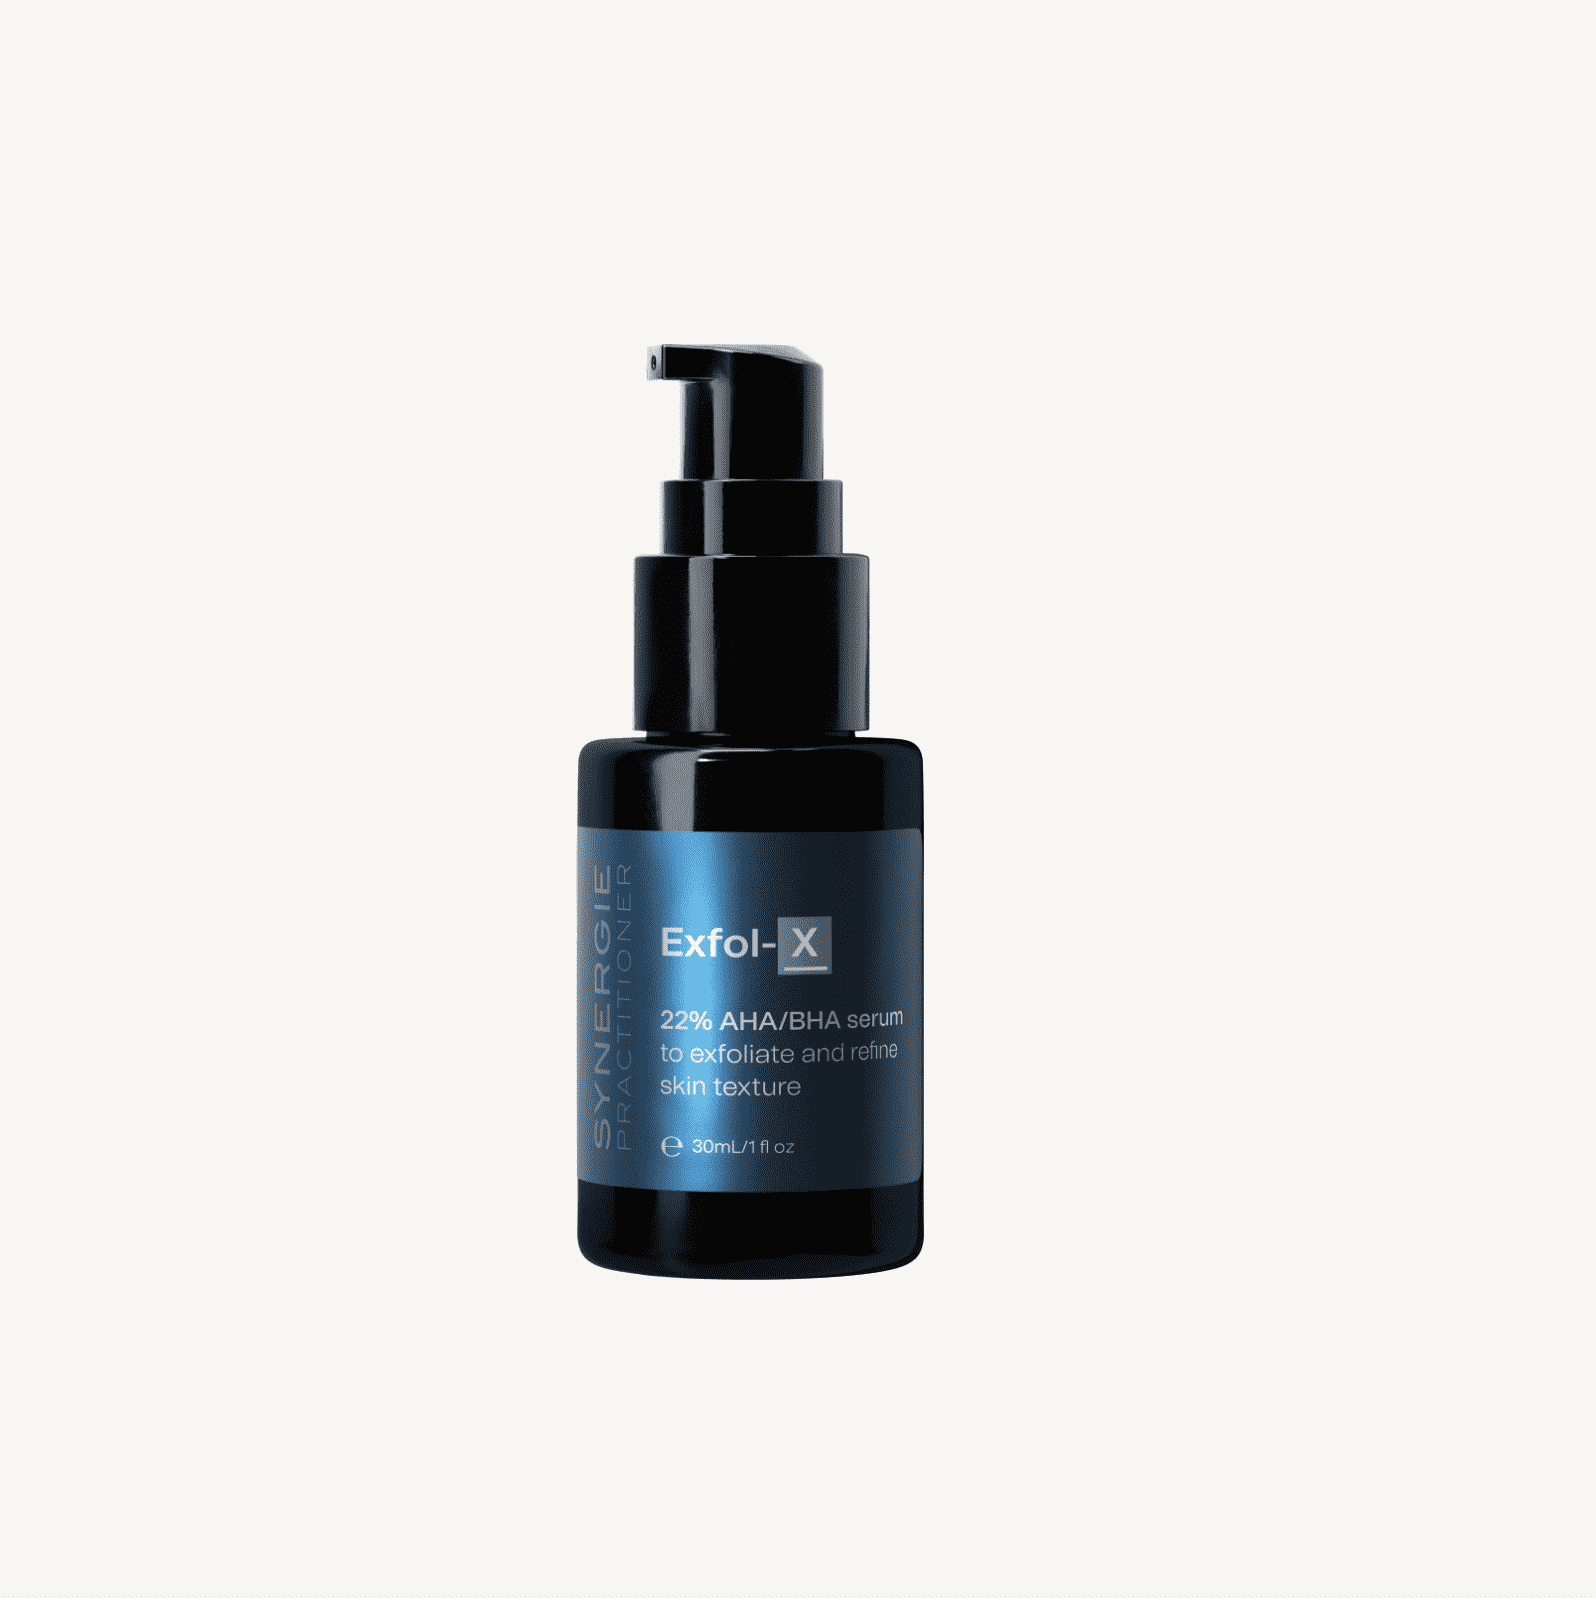 A dark blue pump bottle of omorovicza exfol-x, a 22% aha/bha serum, designed to exfoliate and refine skin texture, isolated on a white background.